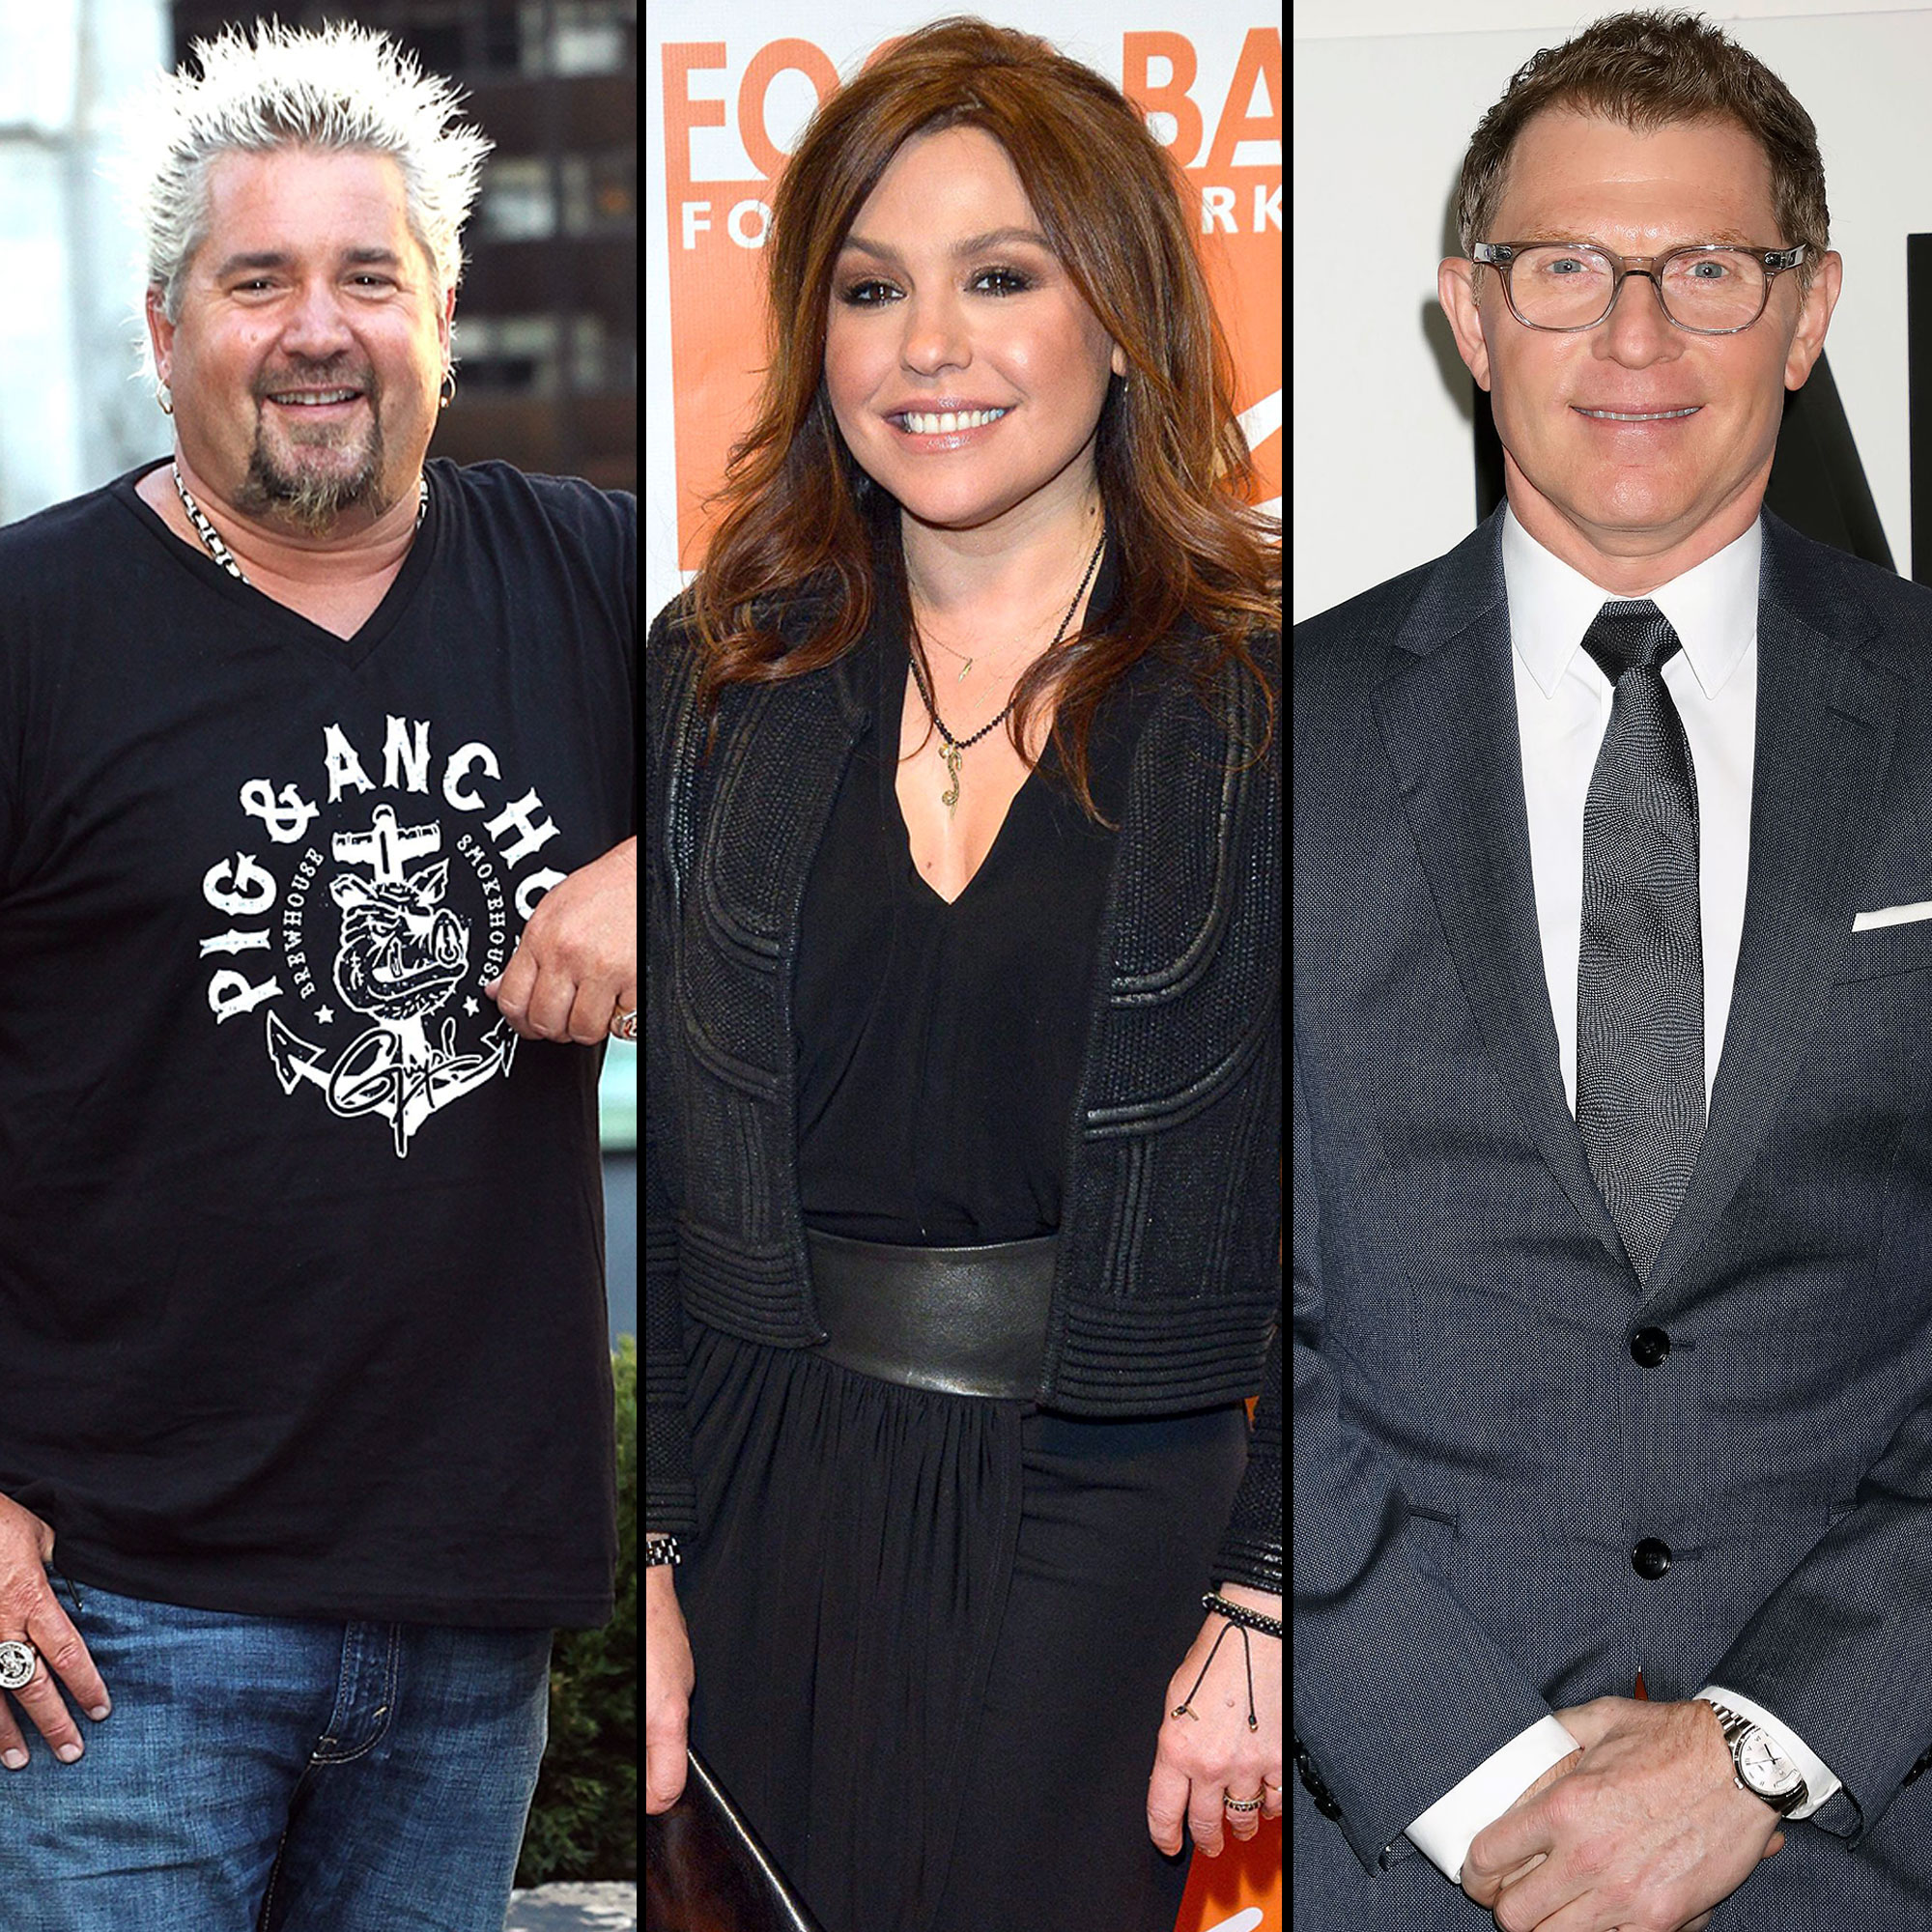 Food Network Stars' Salaries: How Much Money Do They Make?